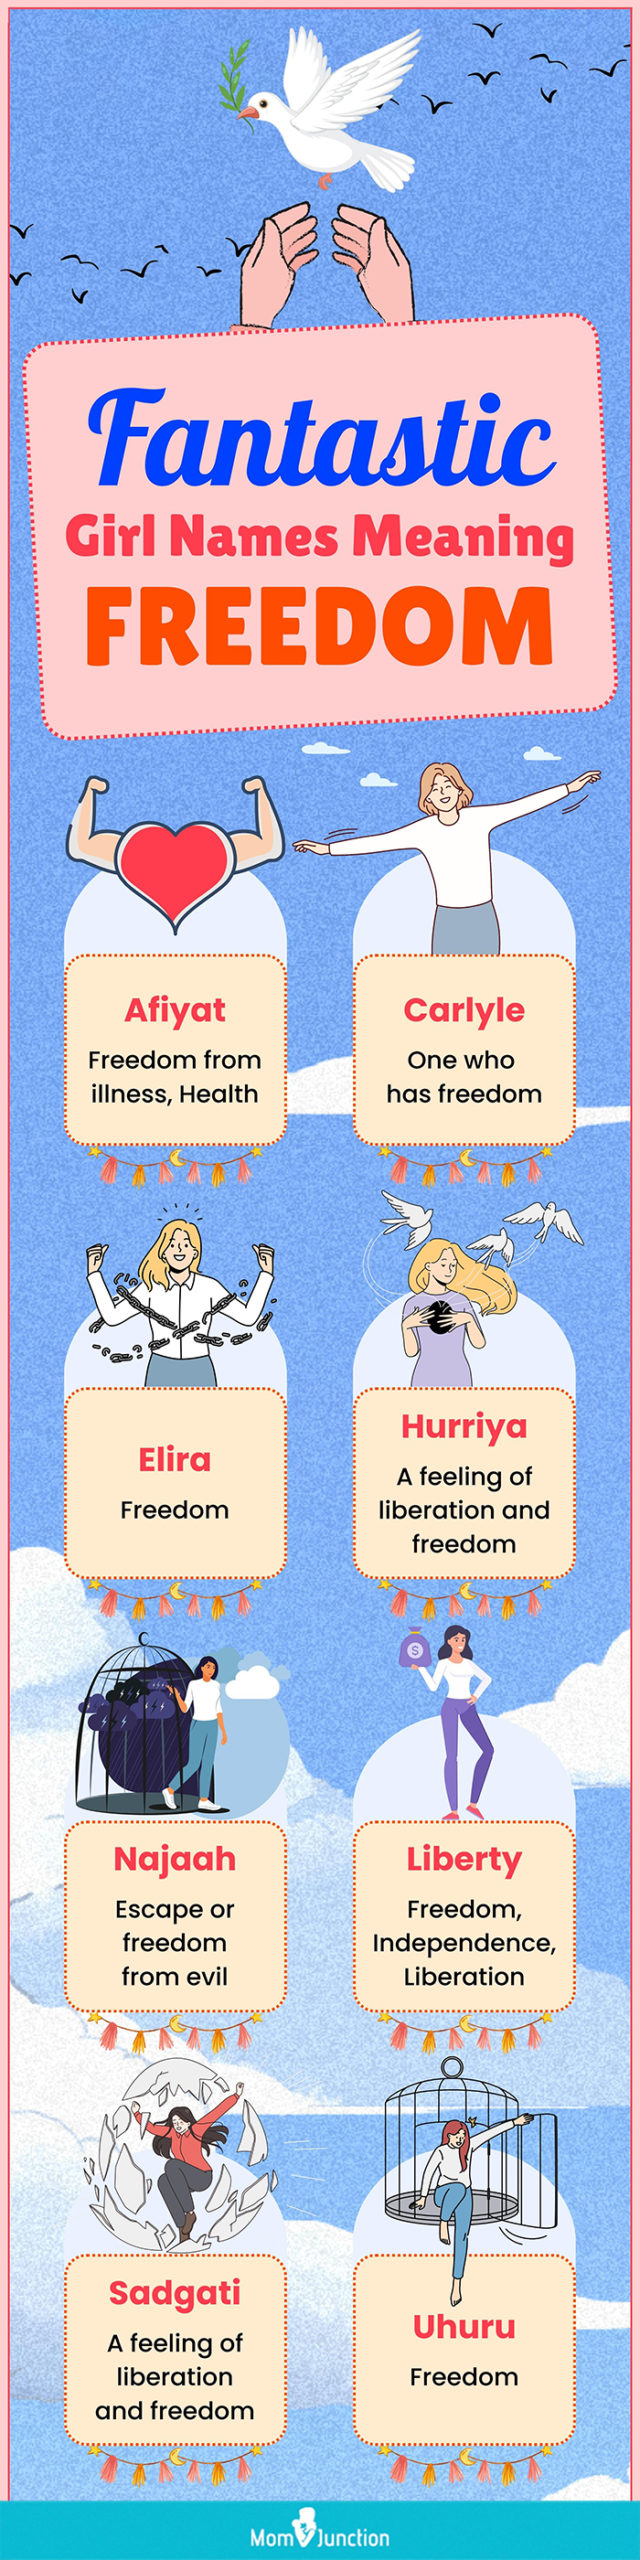 fantastic girl names meaning freedom (infographic)